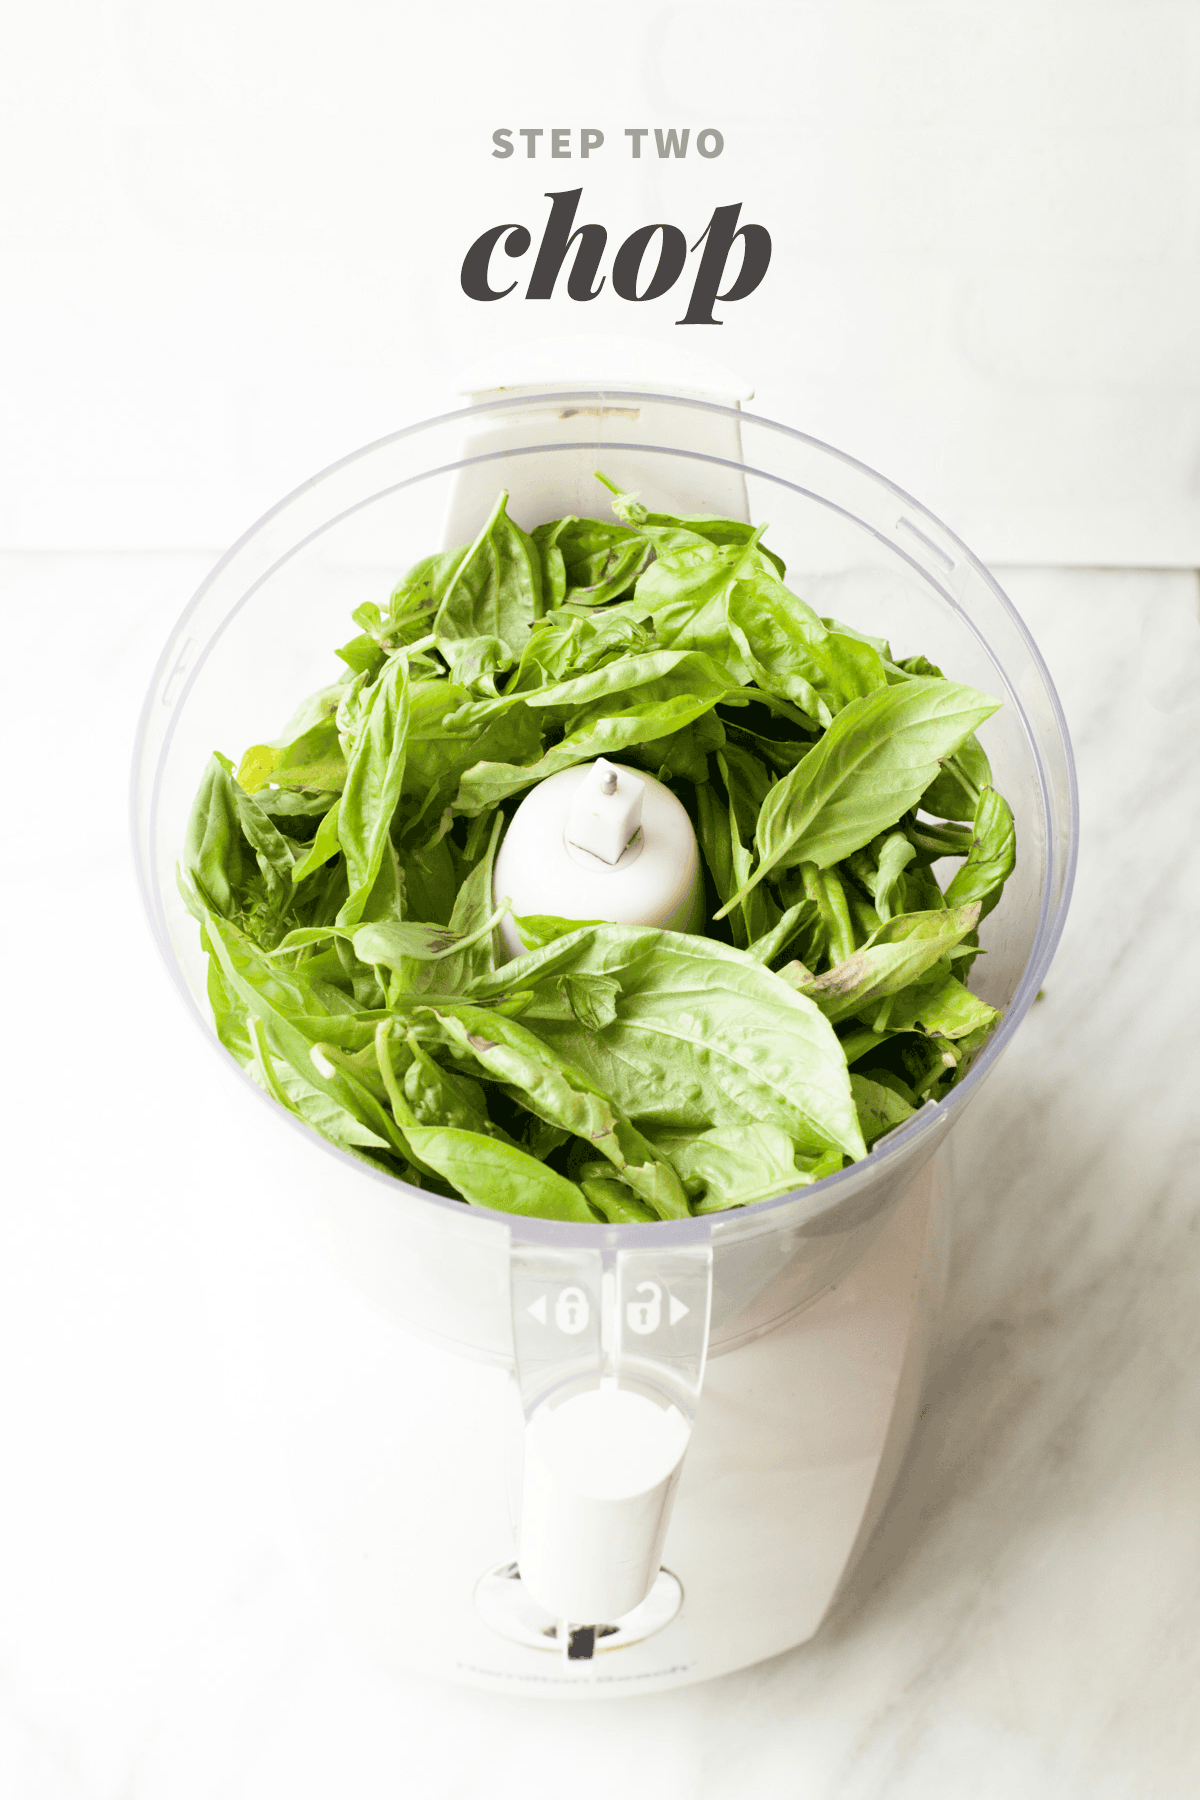 Fresh basil leaves fill a food processor bowl. A text overlay reads "Step Two: Chop."